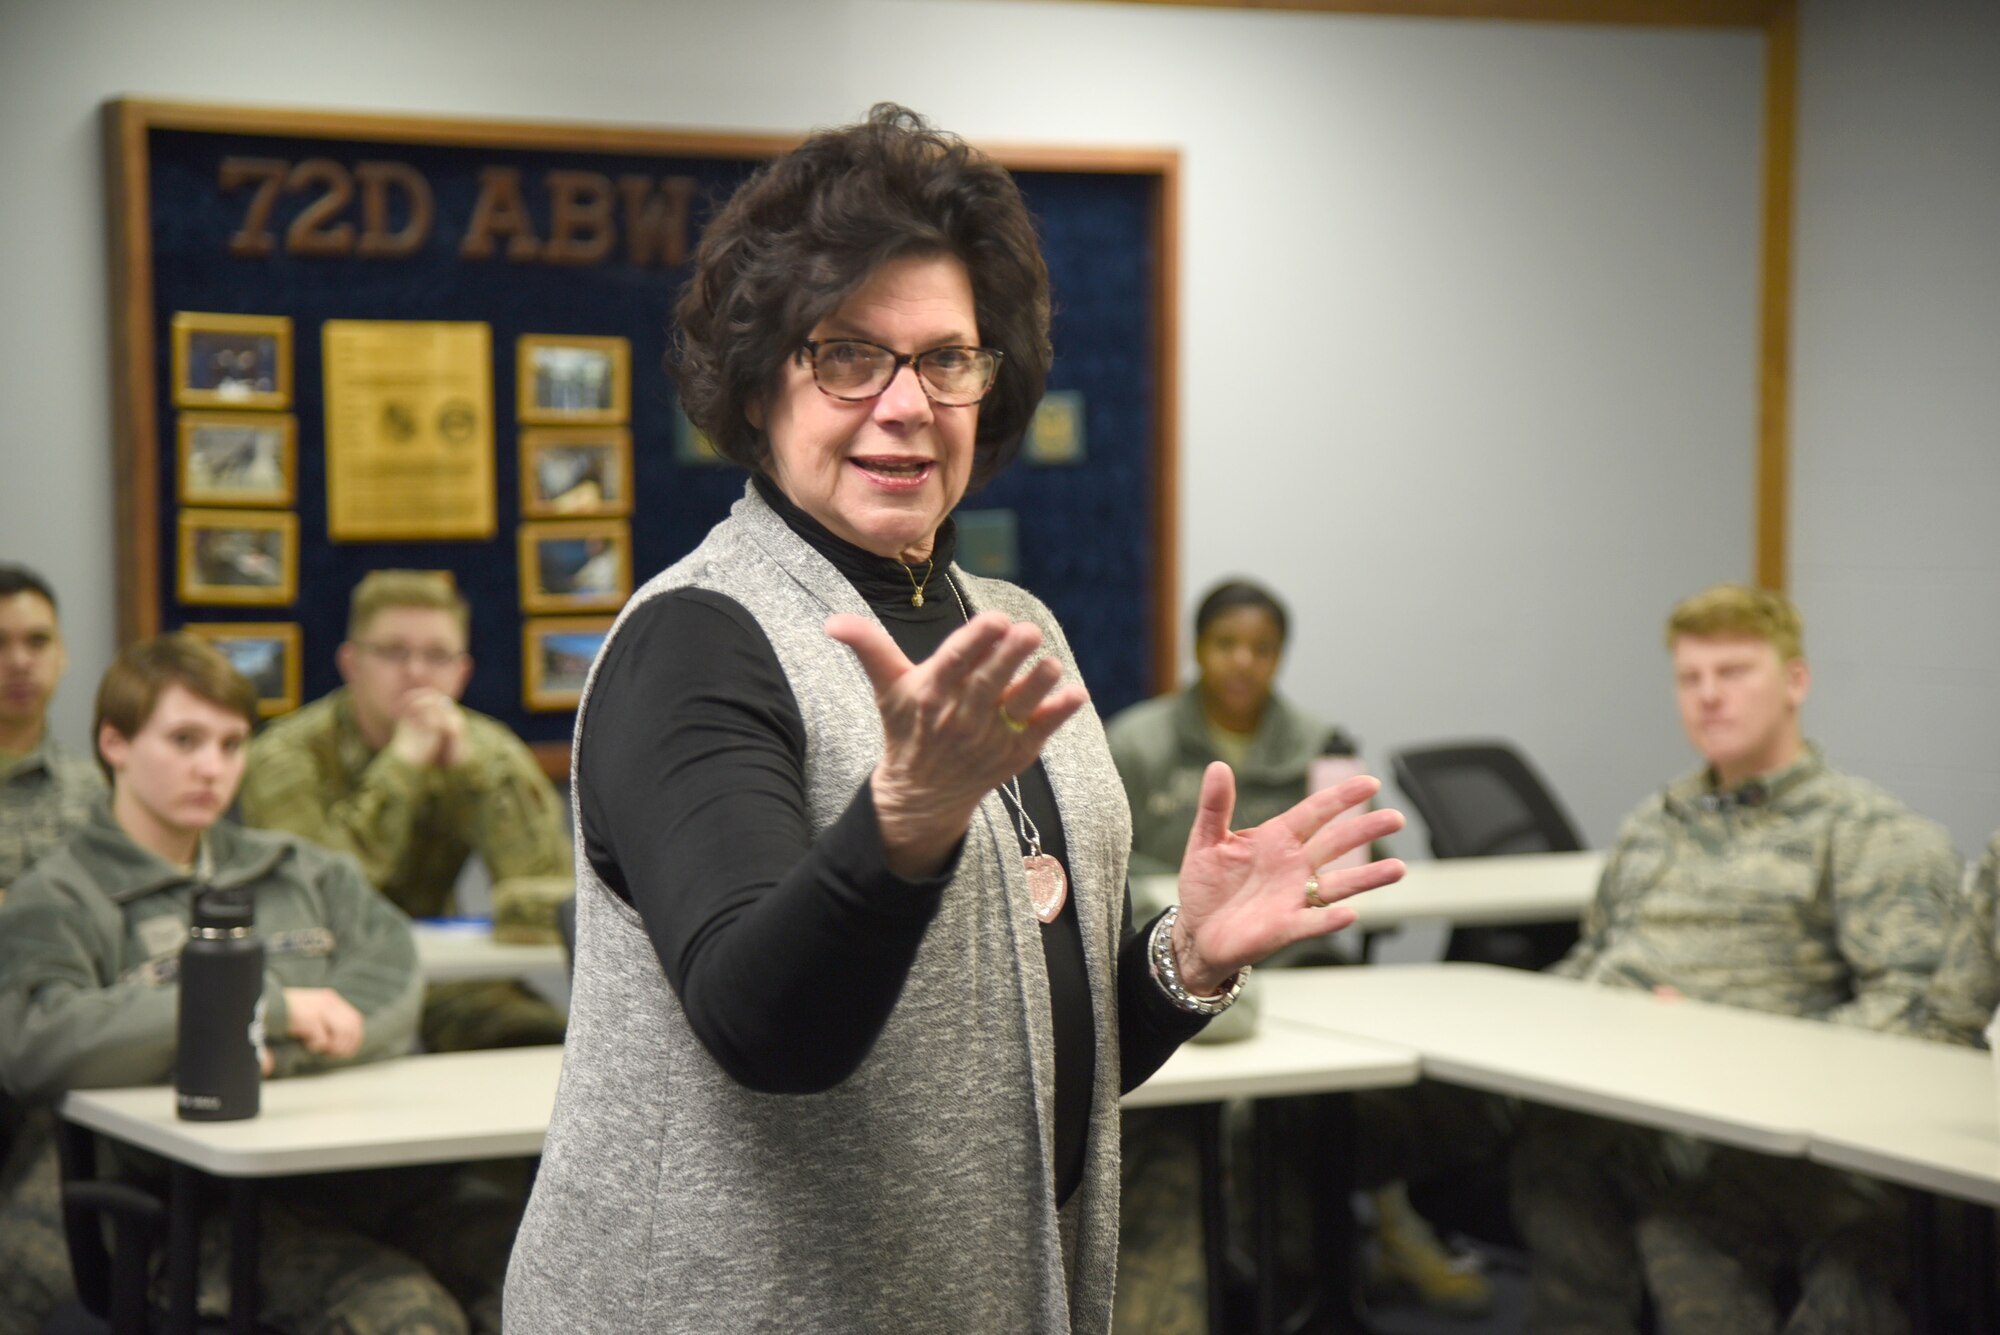 Pam Kloiber, founder of the Tinker Home Away From Home program, speaks to Airmen at the First Term Airman Center about joining the program Feb. 10. The program has grown substantially from its inception in 2013, serving a total of 758 Airmen and Sailors at Tinker. The program focuses on new Airmen and Sailors, pairing them with host families from the surrounding communities, which gives them a somewhat familiar place to go outside their dorms and the Tinker gates to relax or share a home-cooked meal and form bonds, friendships and lasting memories. (U.S. Air Force photo/Kelly White)